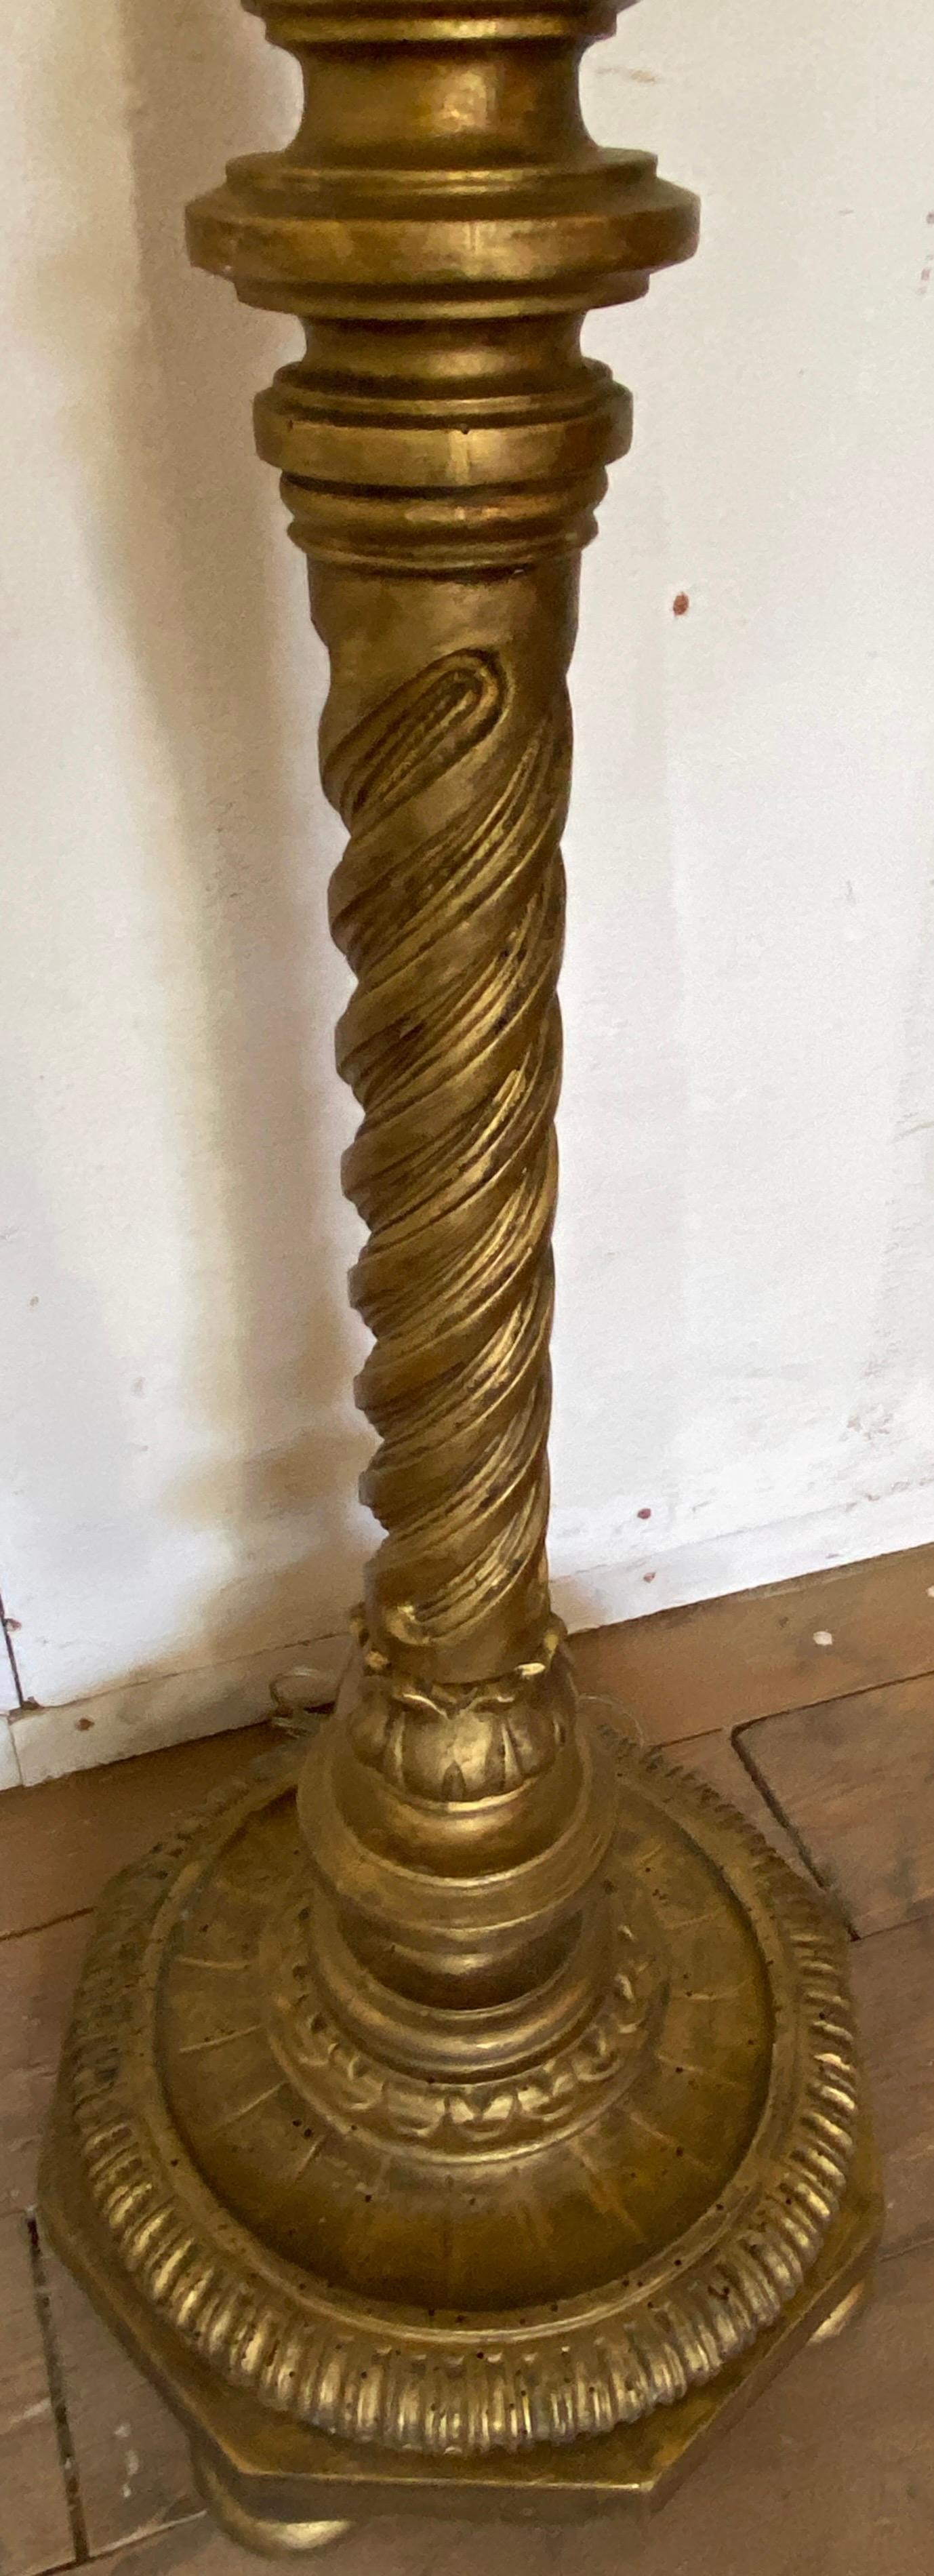 Classic antique Italian baroque style barley twist turned column carved giltwood candle floor lamp with great style and presence.  Newly rewired with foot switch attached to lamp chord.
Search terms:
Italian Renaissance style floor lamp.
Hollywood